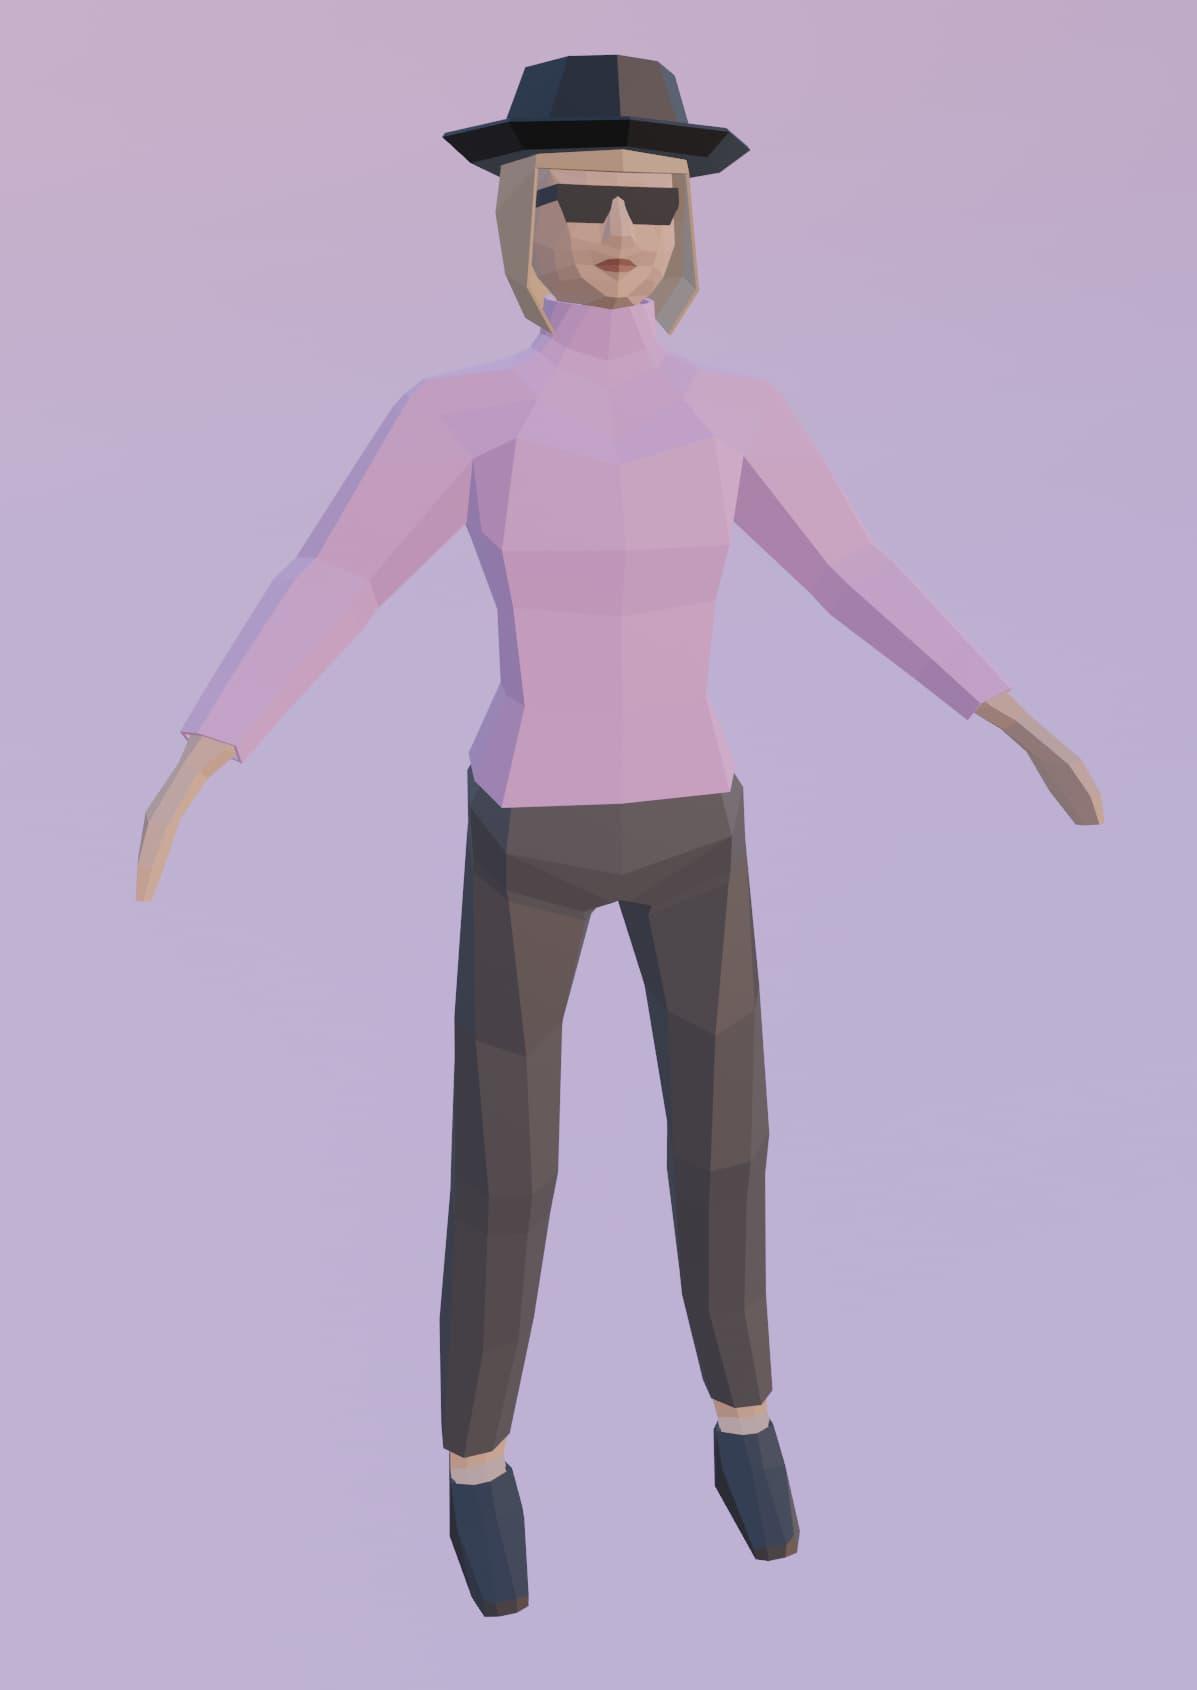 A low-poly 3D model of a fair-skinned woman with short blonde hair, a black pork pie hat, black sunglasses, a pink turtleneck, black leggings, and black shoes. The design evokes a reference to Heisenberg from the series Breaking Bad